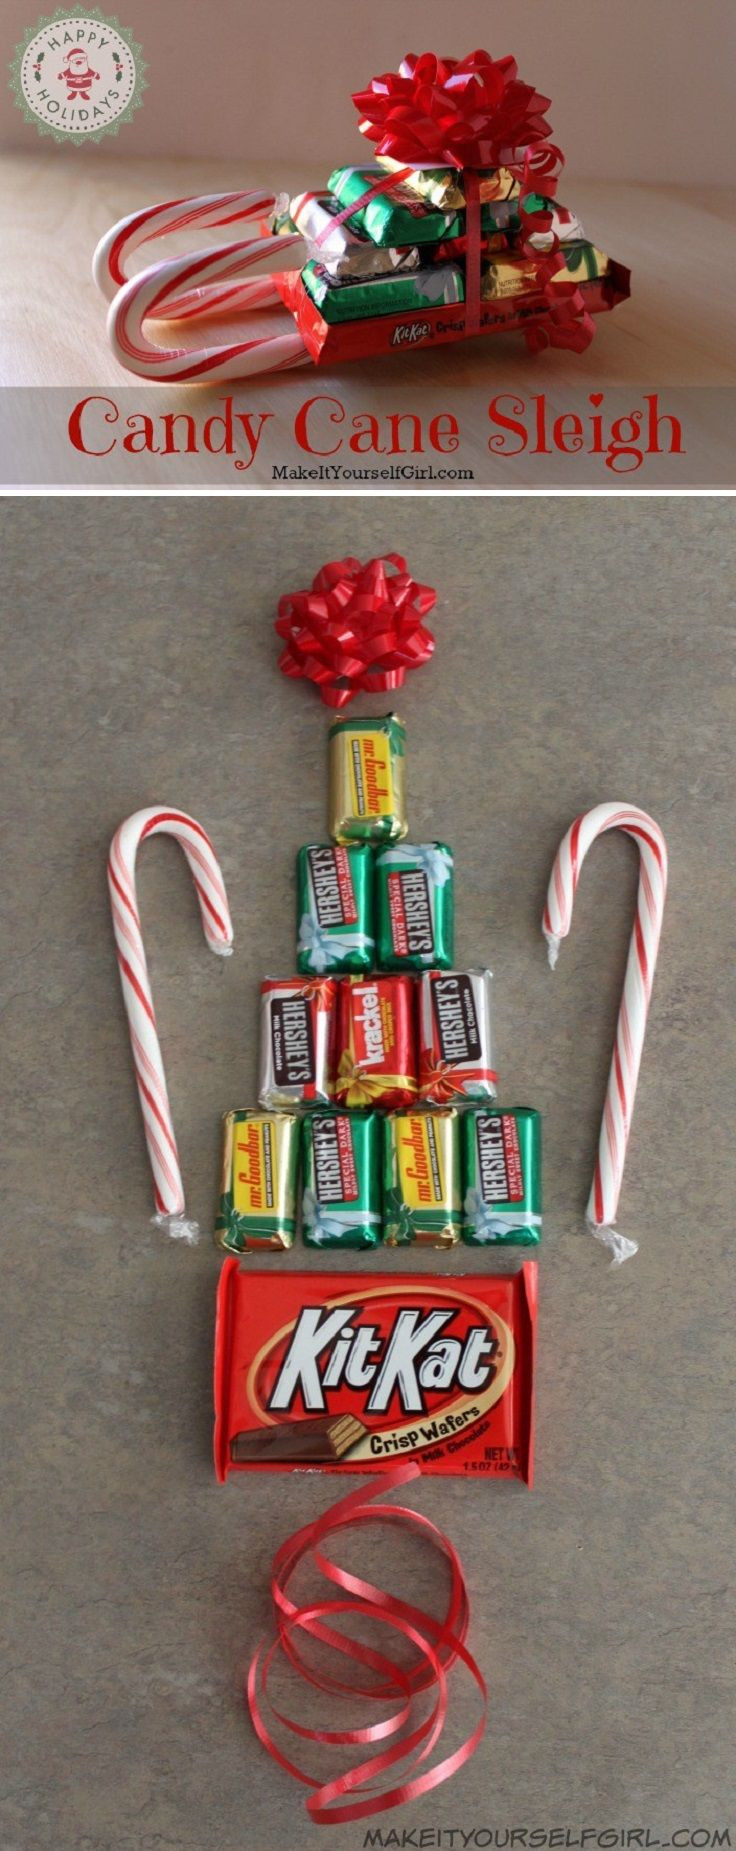 Candy Christmas Gifts
 Simple DIY Candy Cane Sleigh 12 Wondrous DIY Candy Cane